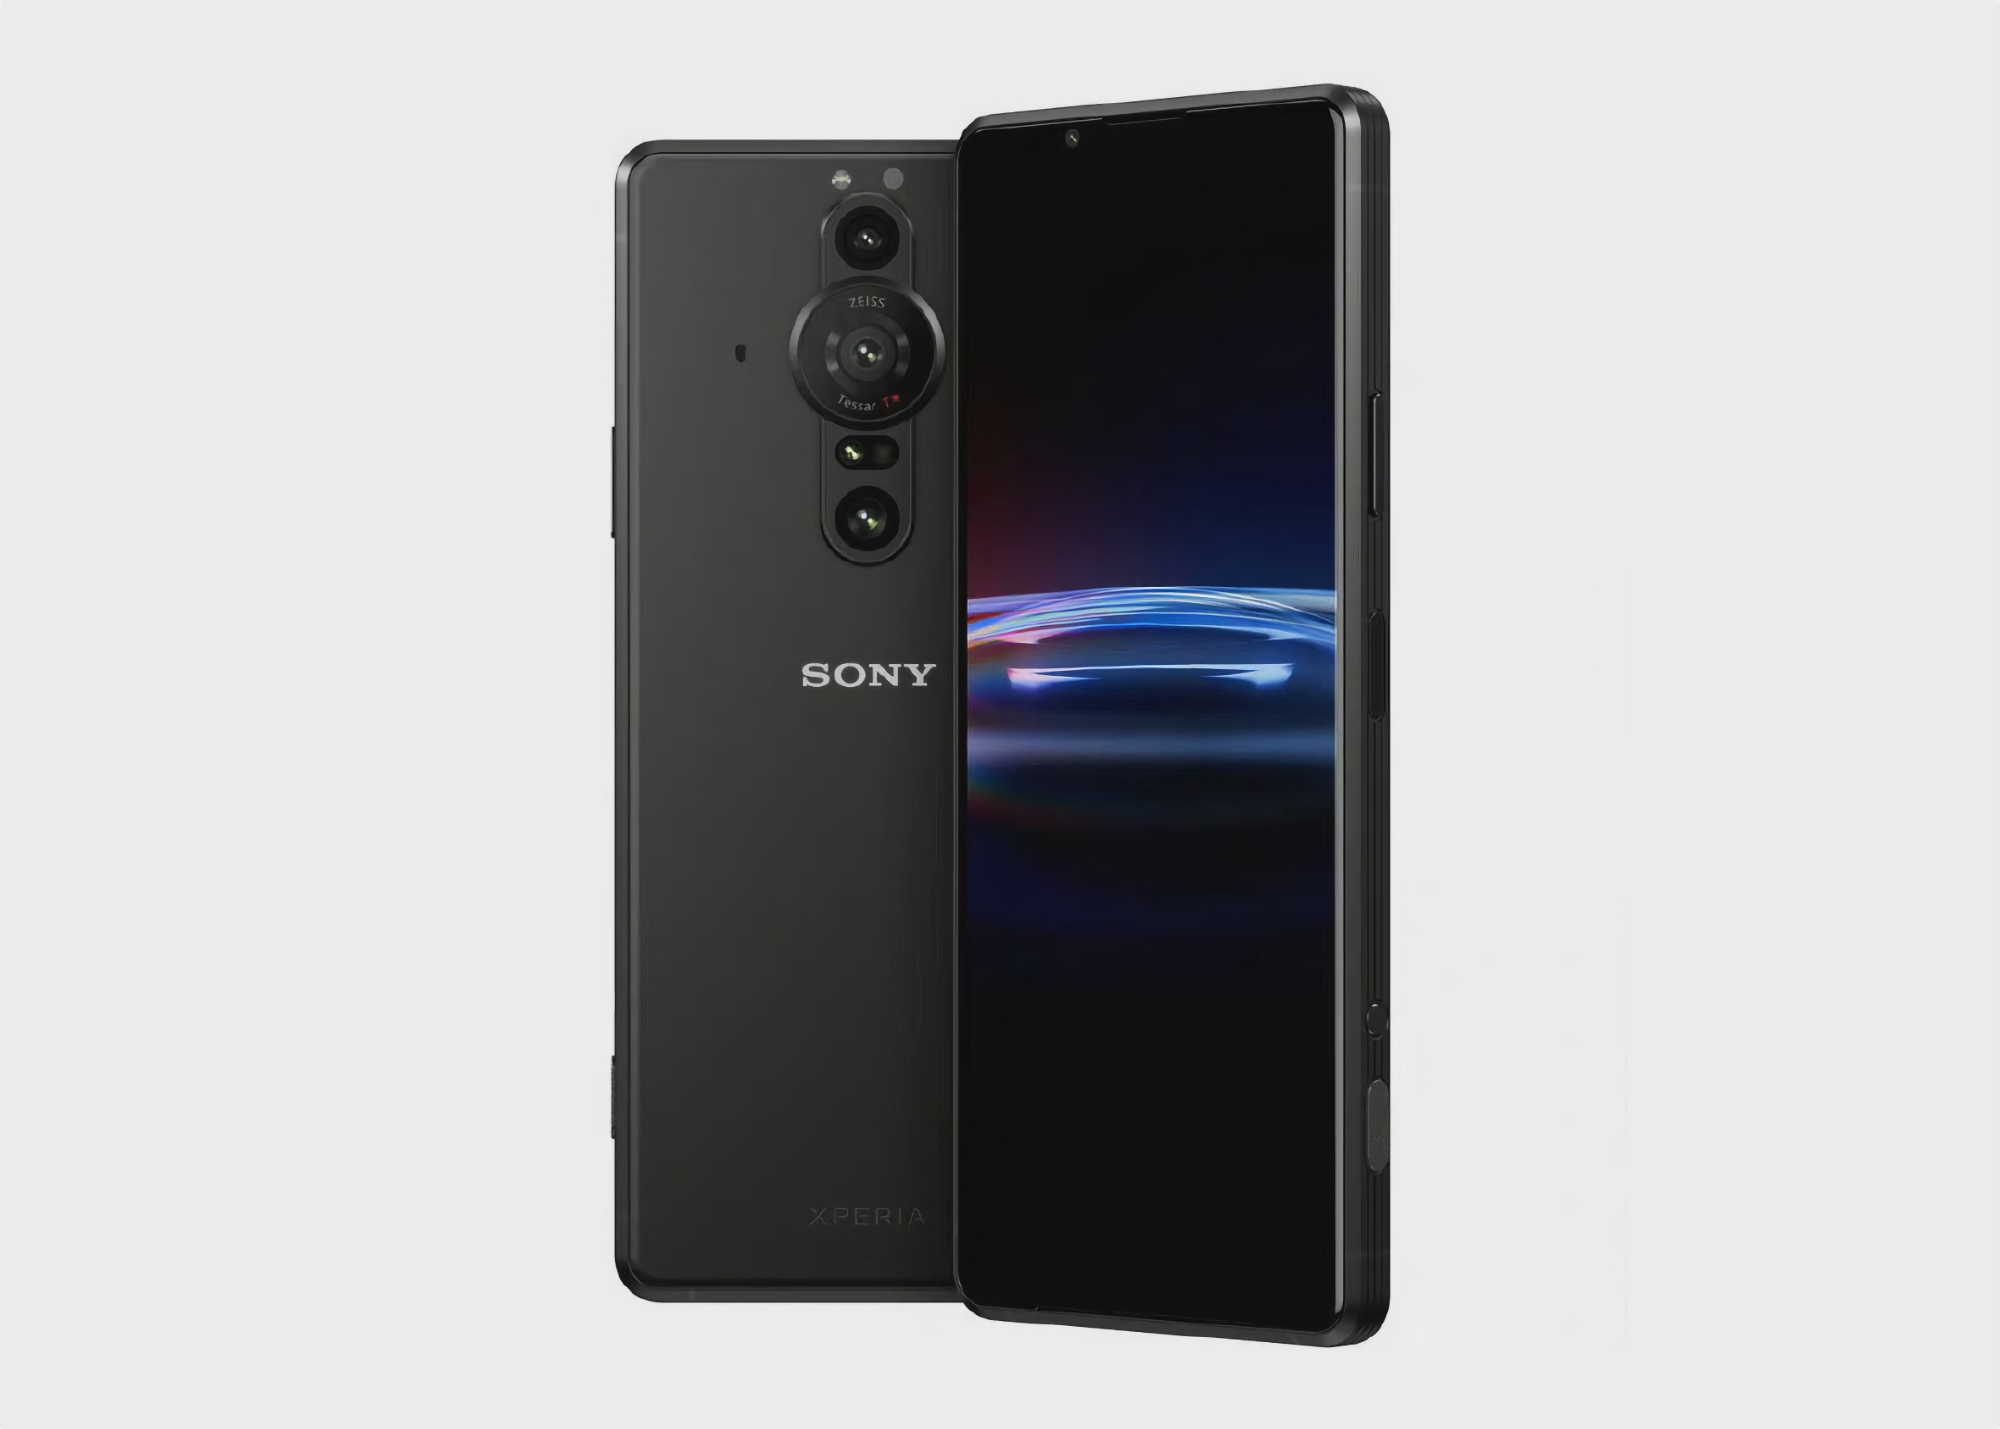 Sony will unveil VR helmet and flagship Xperia Pro-I smartphone with 1-inch camera sensor on October 26